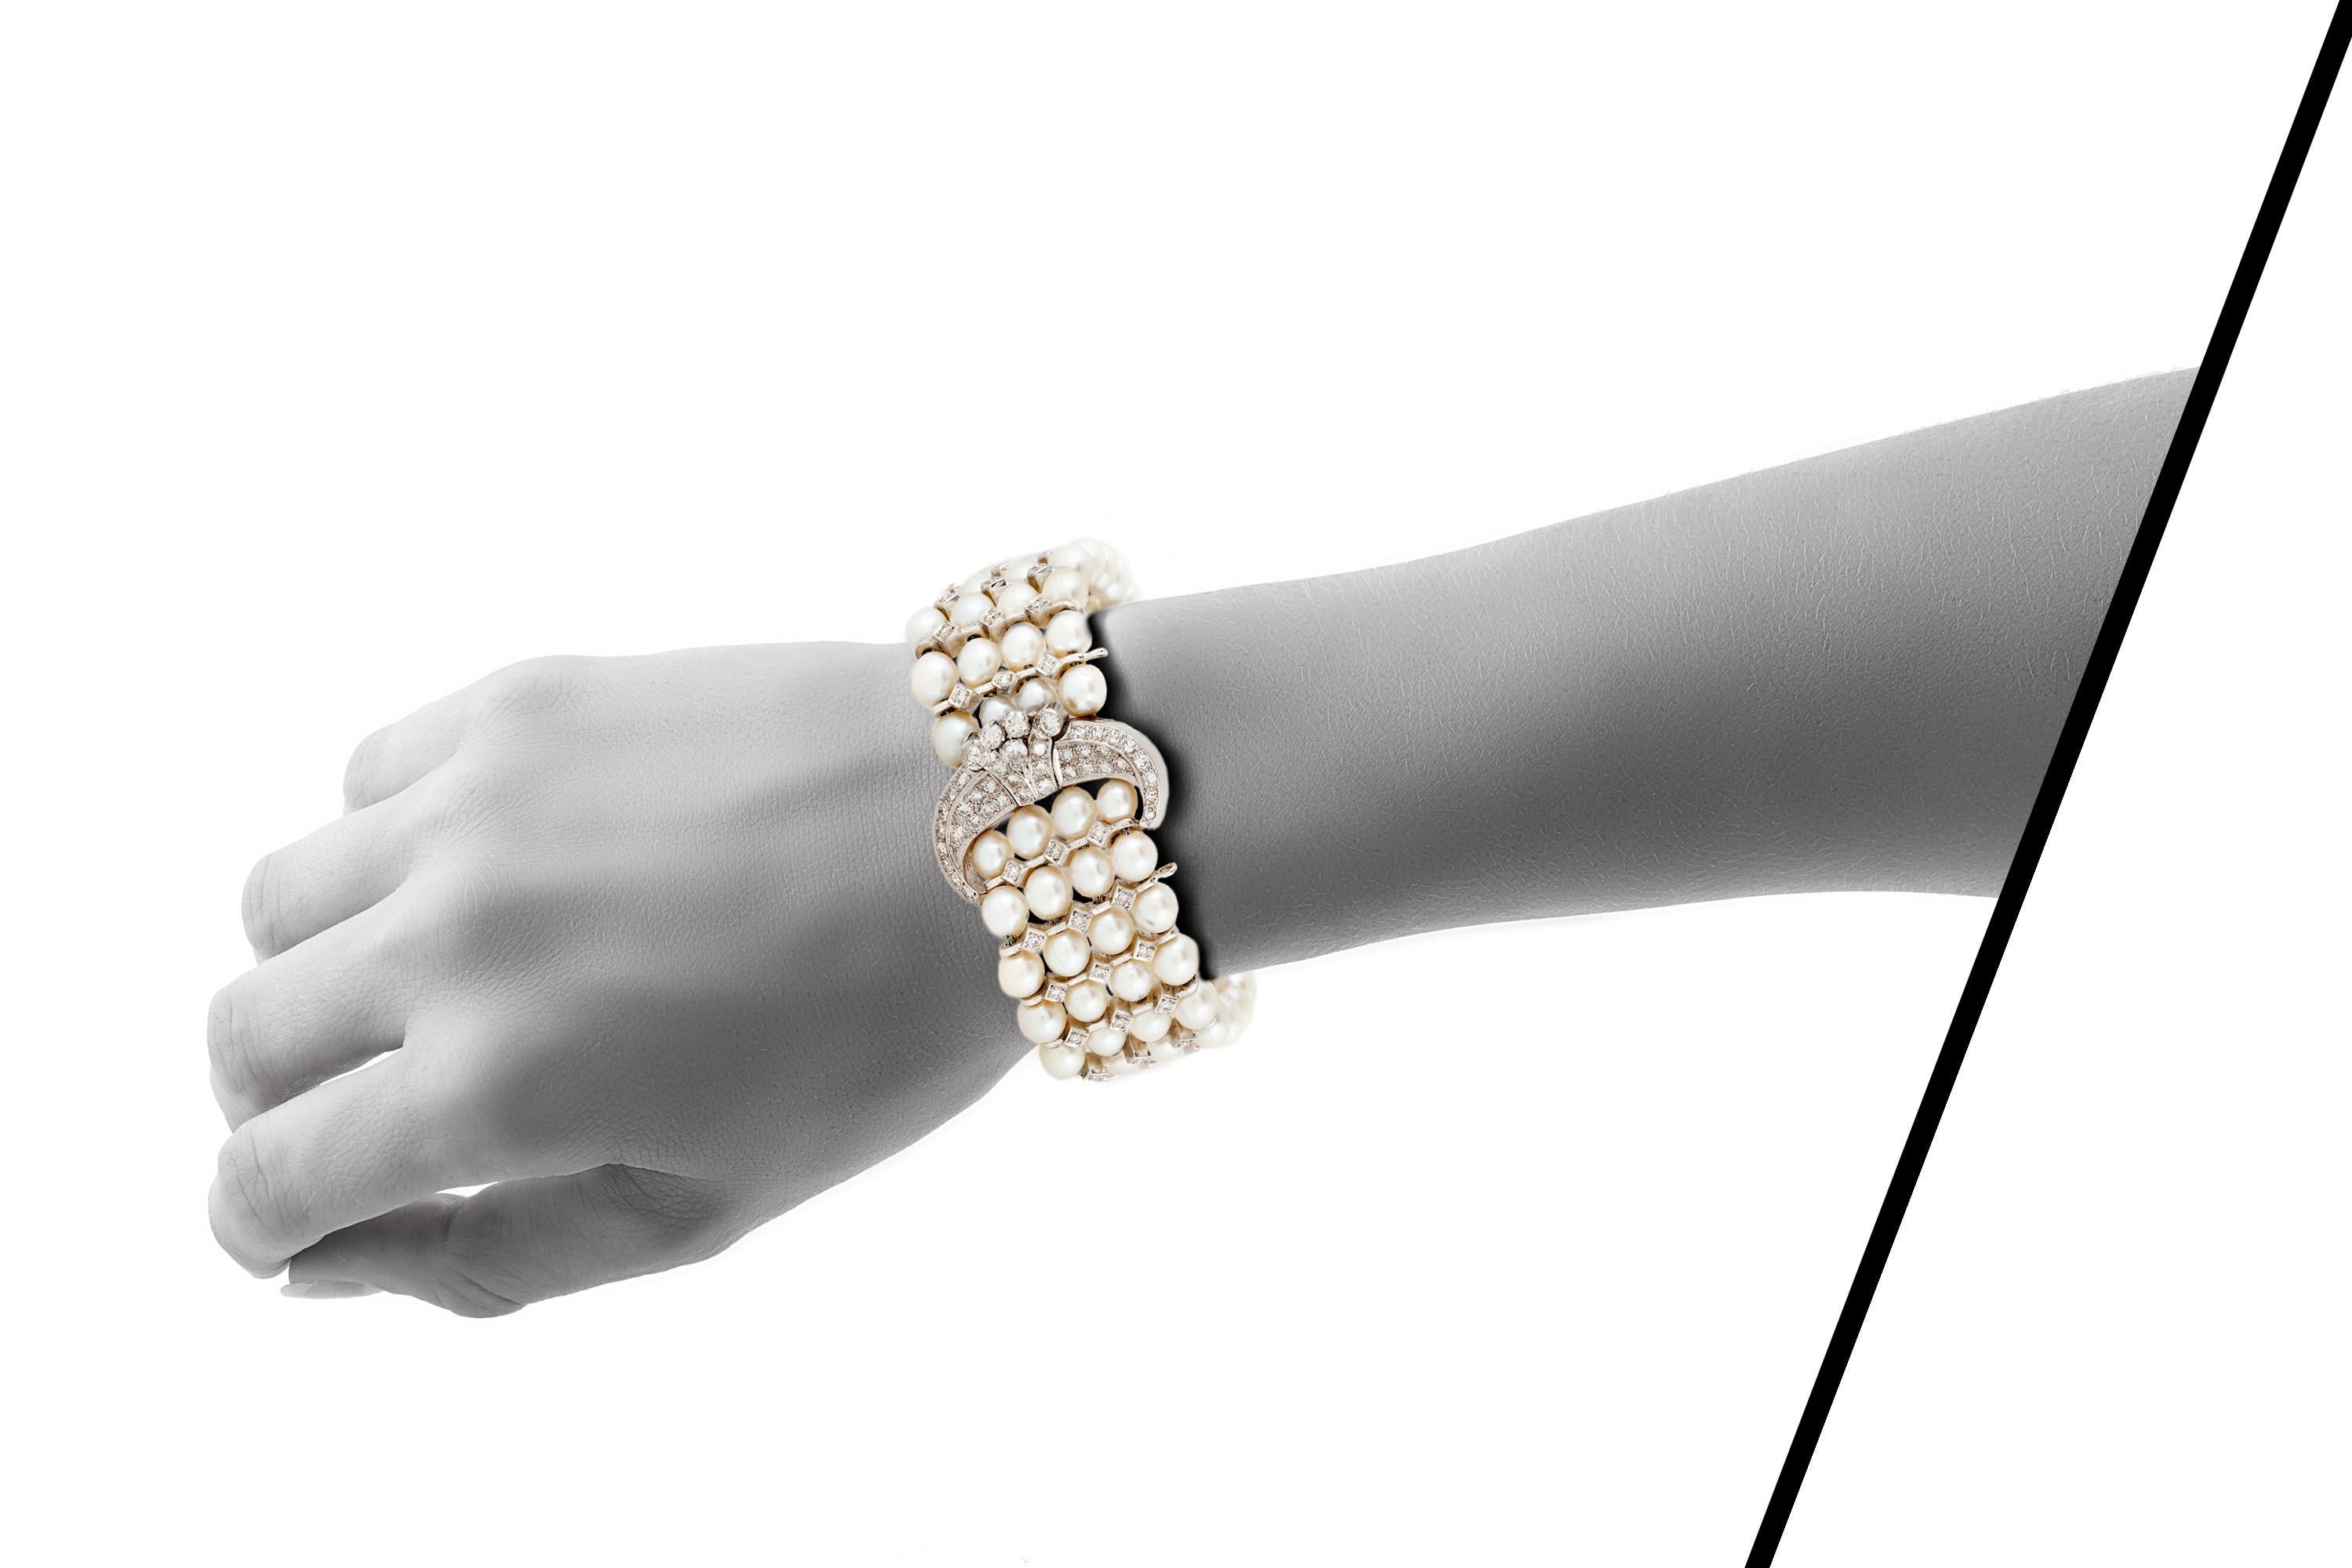 Vintage pearl and diamonds bracelet, featuring four strands of cultured pearls with buckle clasp and dividing bars, finely crafted in platinum with single cut diamonds, weighing a total of approximately 4.50 carats.

Circa 1950's